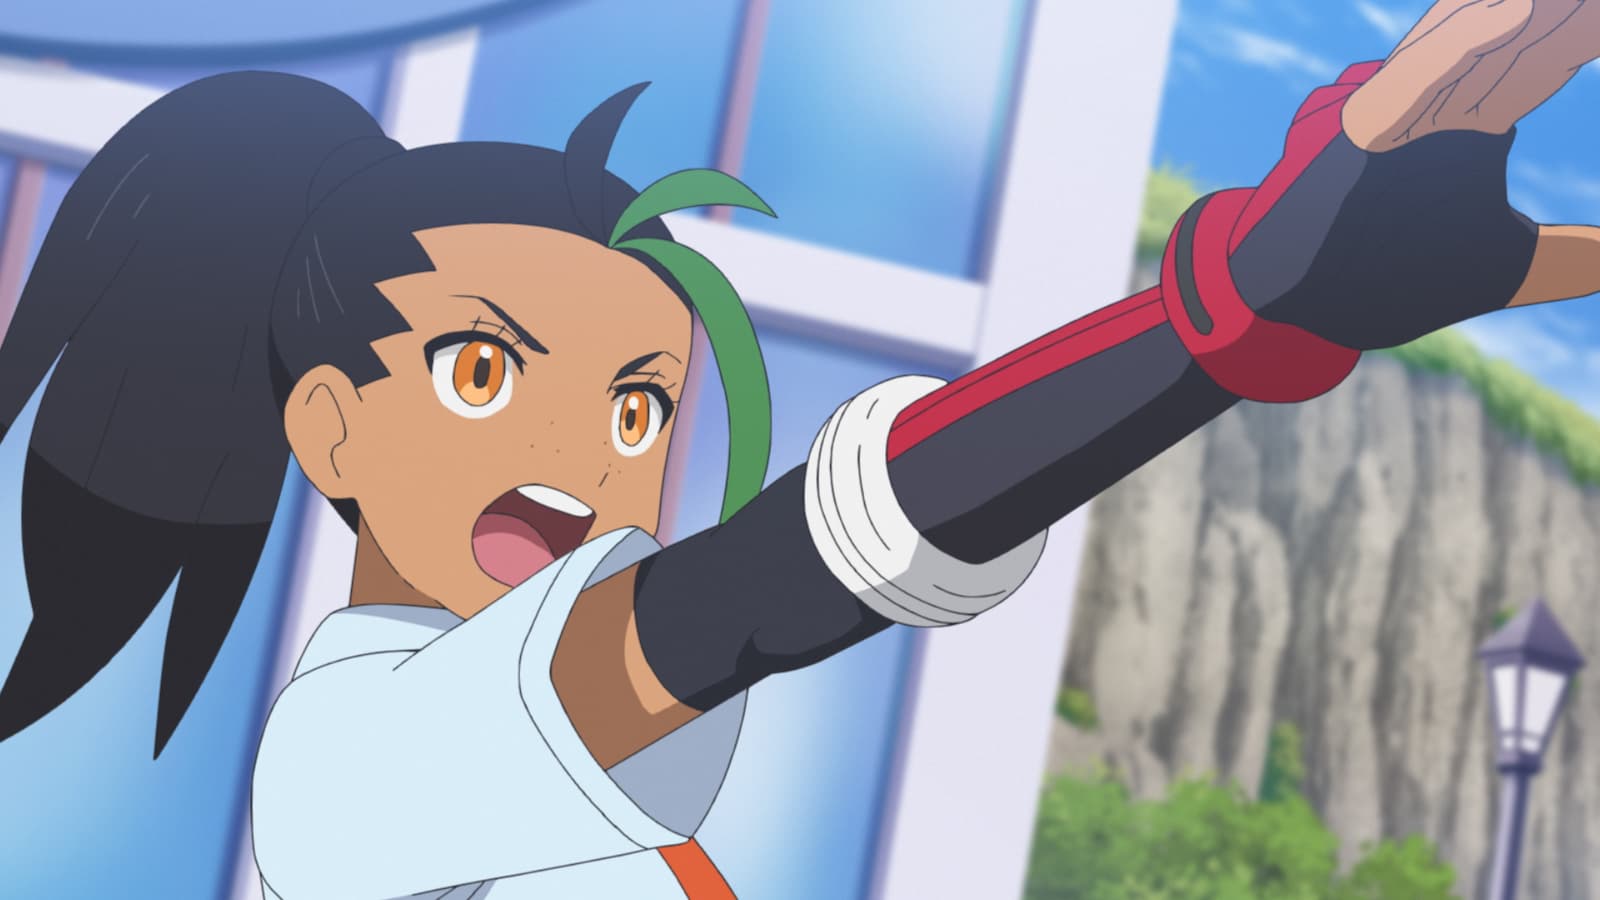 Pokémon Horizons: The Series Reveals New Trailer and Opening Theme